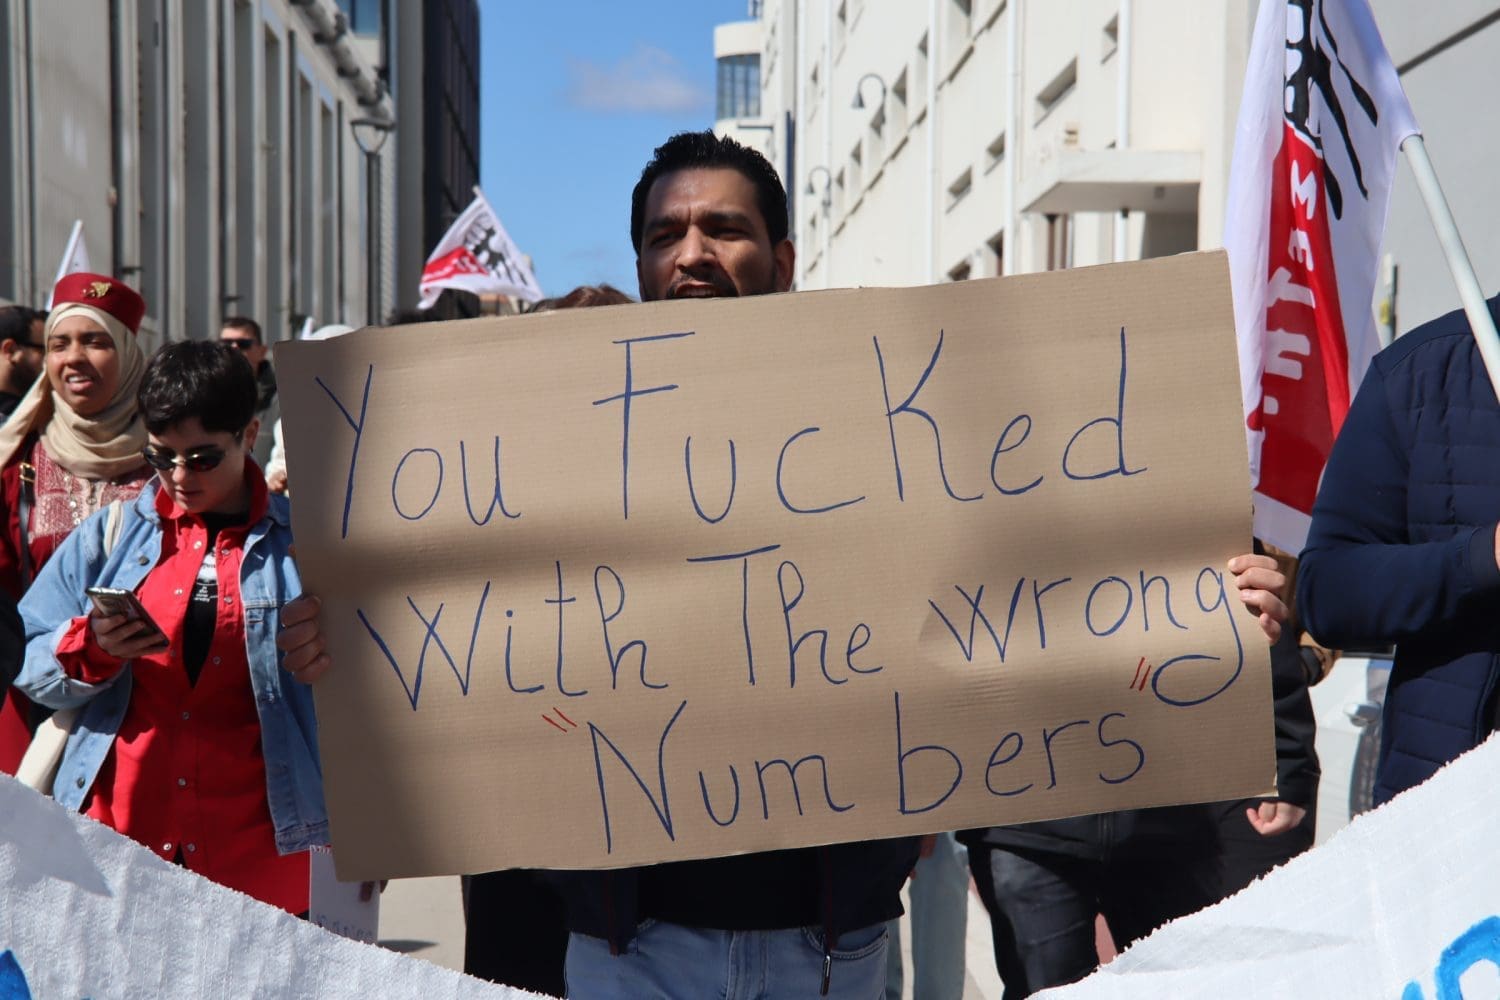 A placard that reads "you fucked with the wrong numbers"